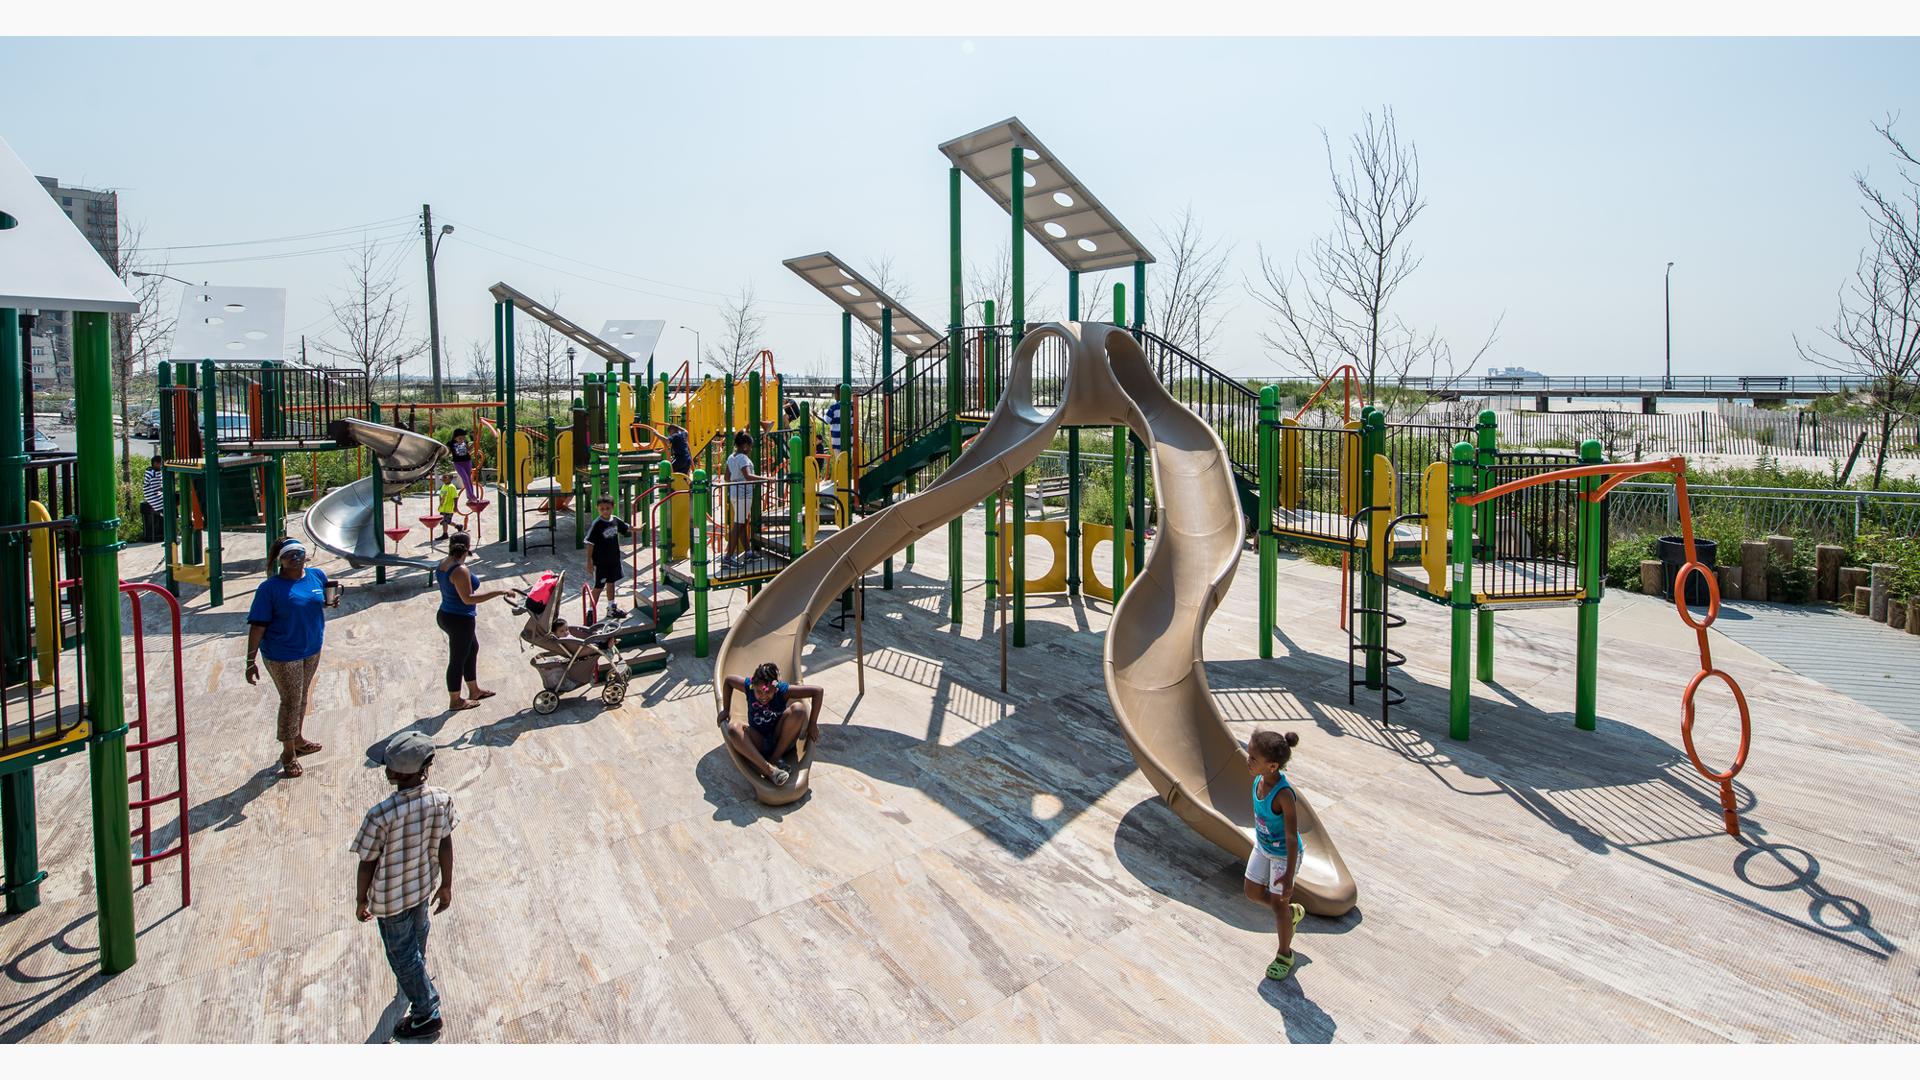 Beach 30th Street Playground Rockaway, NY. This customized PlayBooster® play structure features lots of playground slides like the Stainless Steel Spiral Slide, spinners, bridges, and many playground climbers.